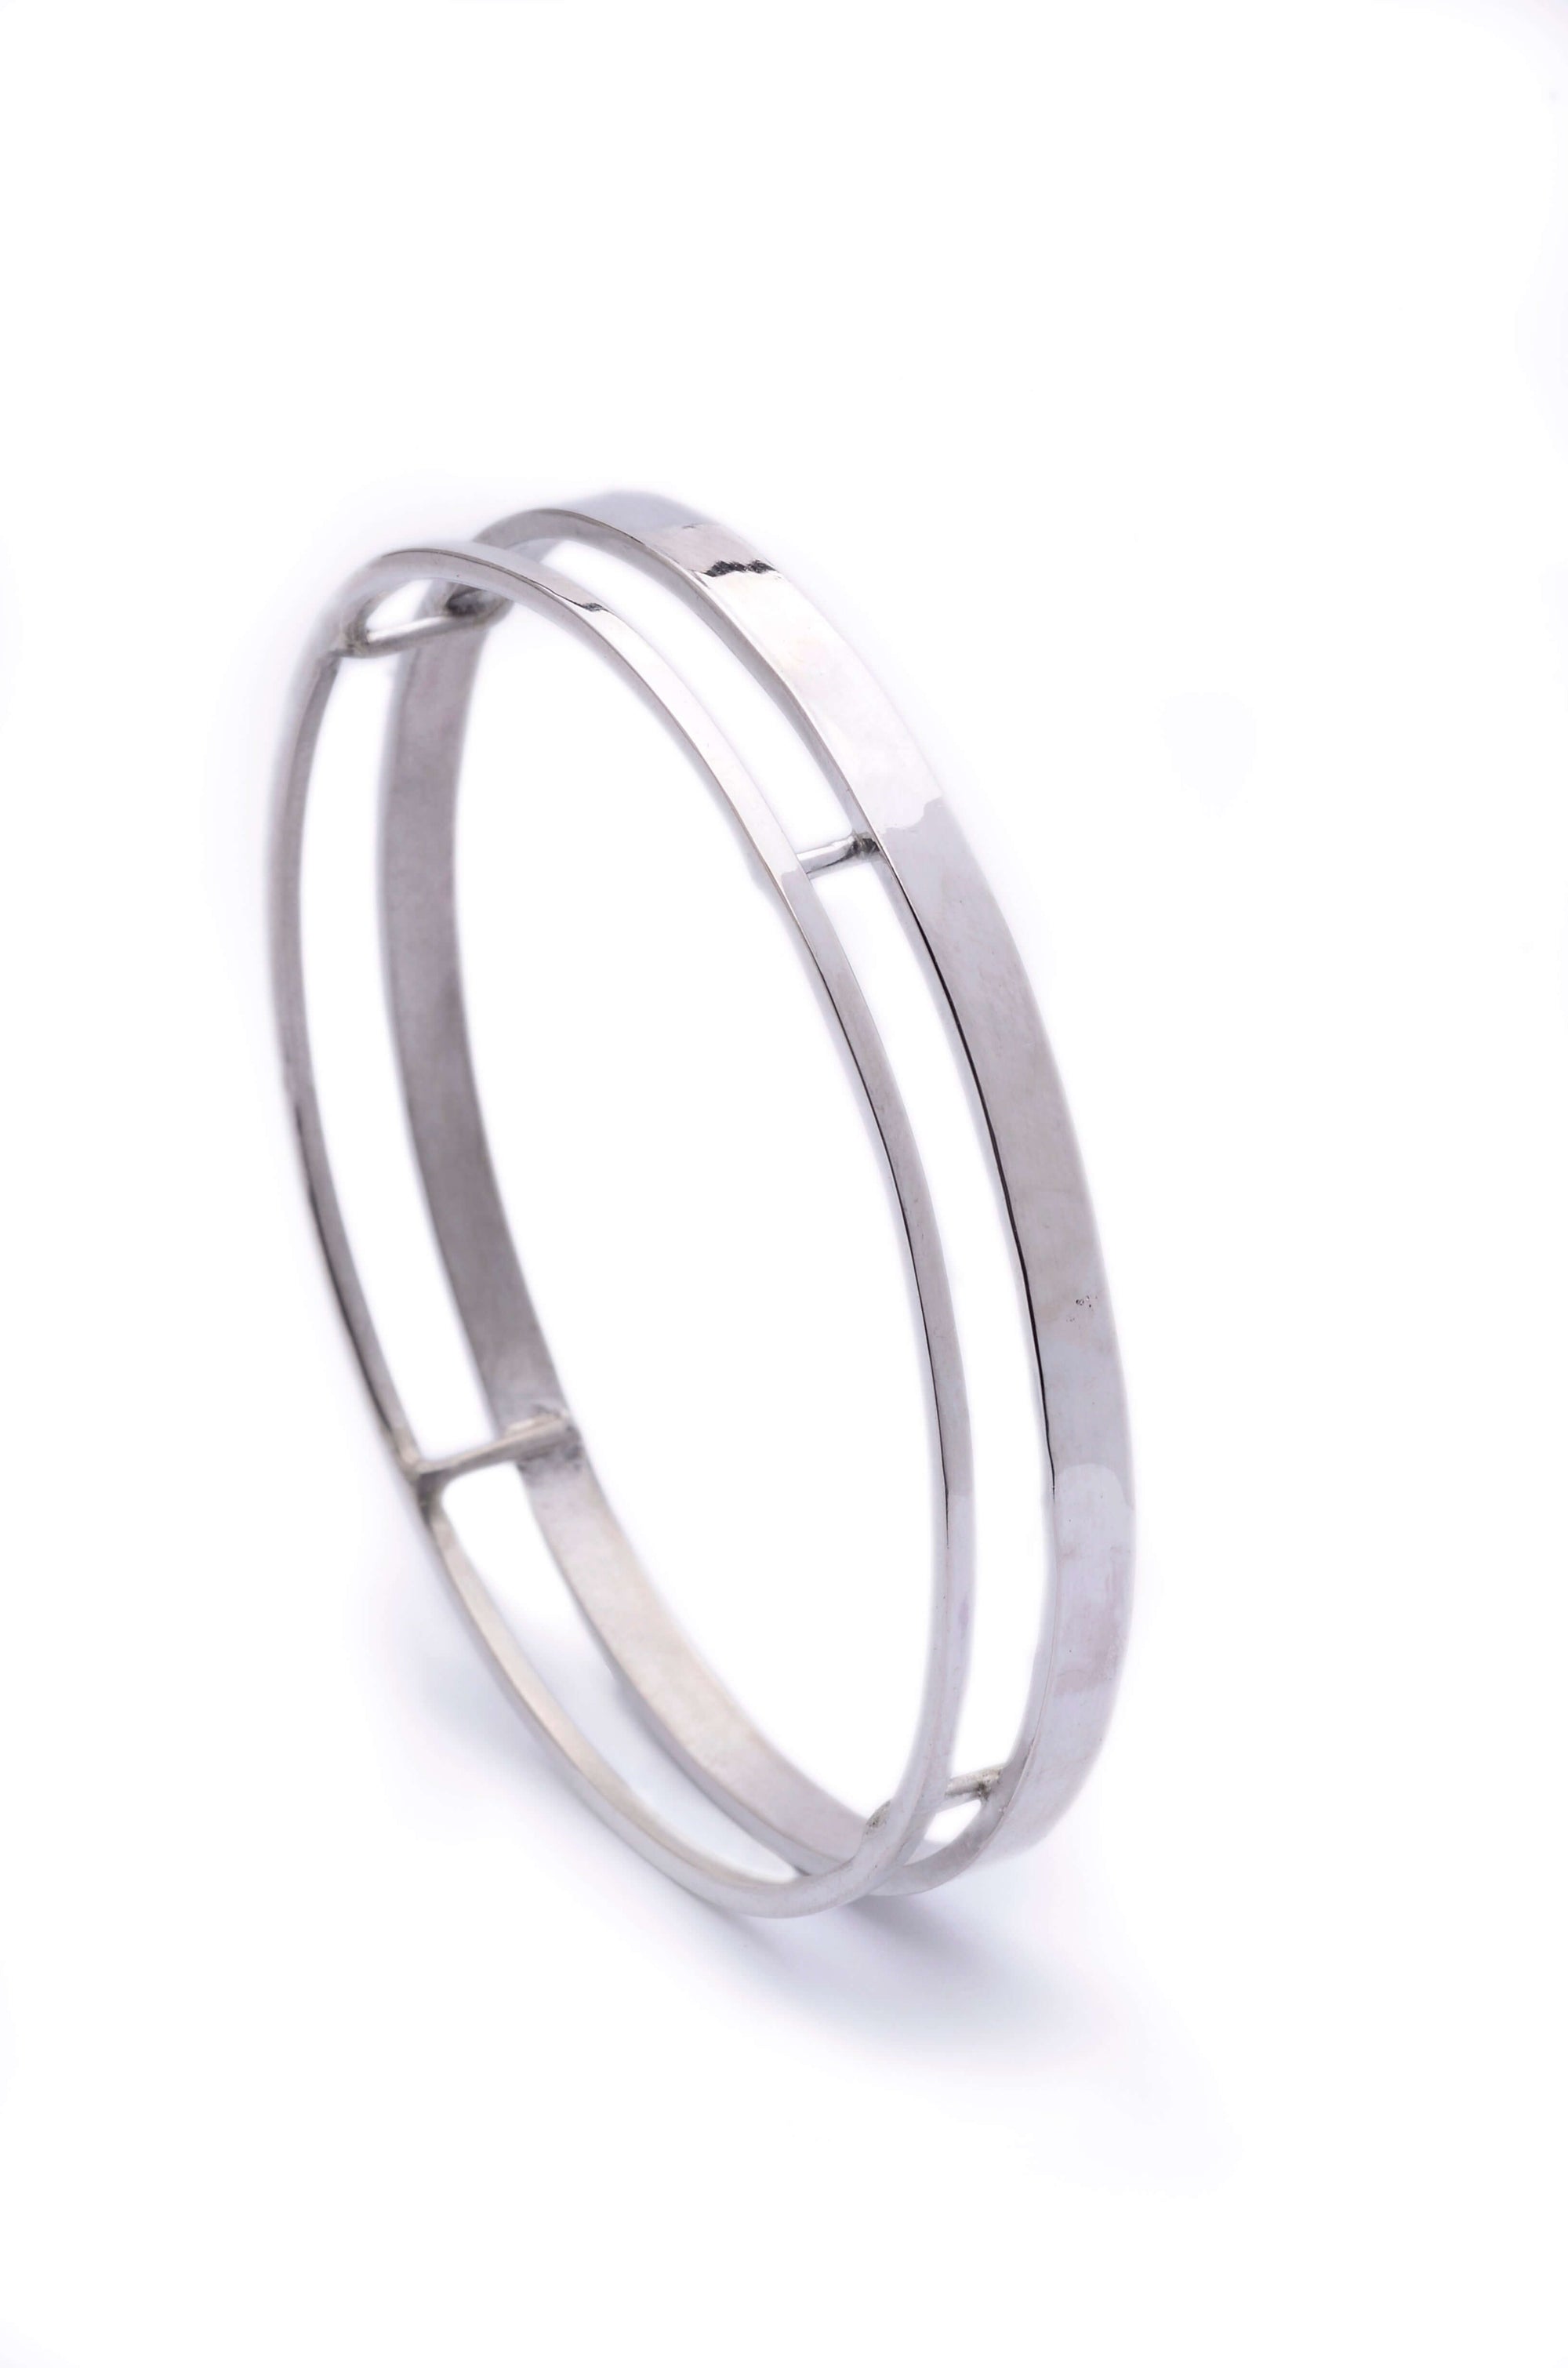 A sterling silver wide bangle bracelet with double band